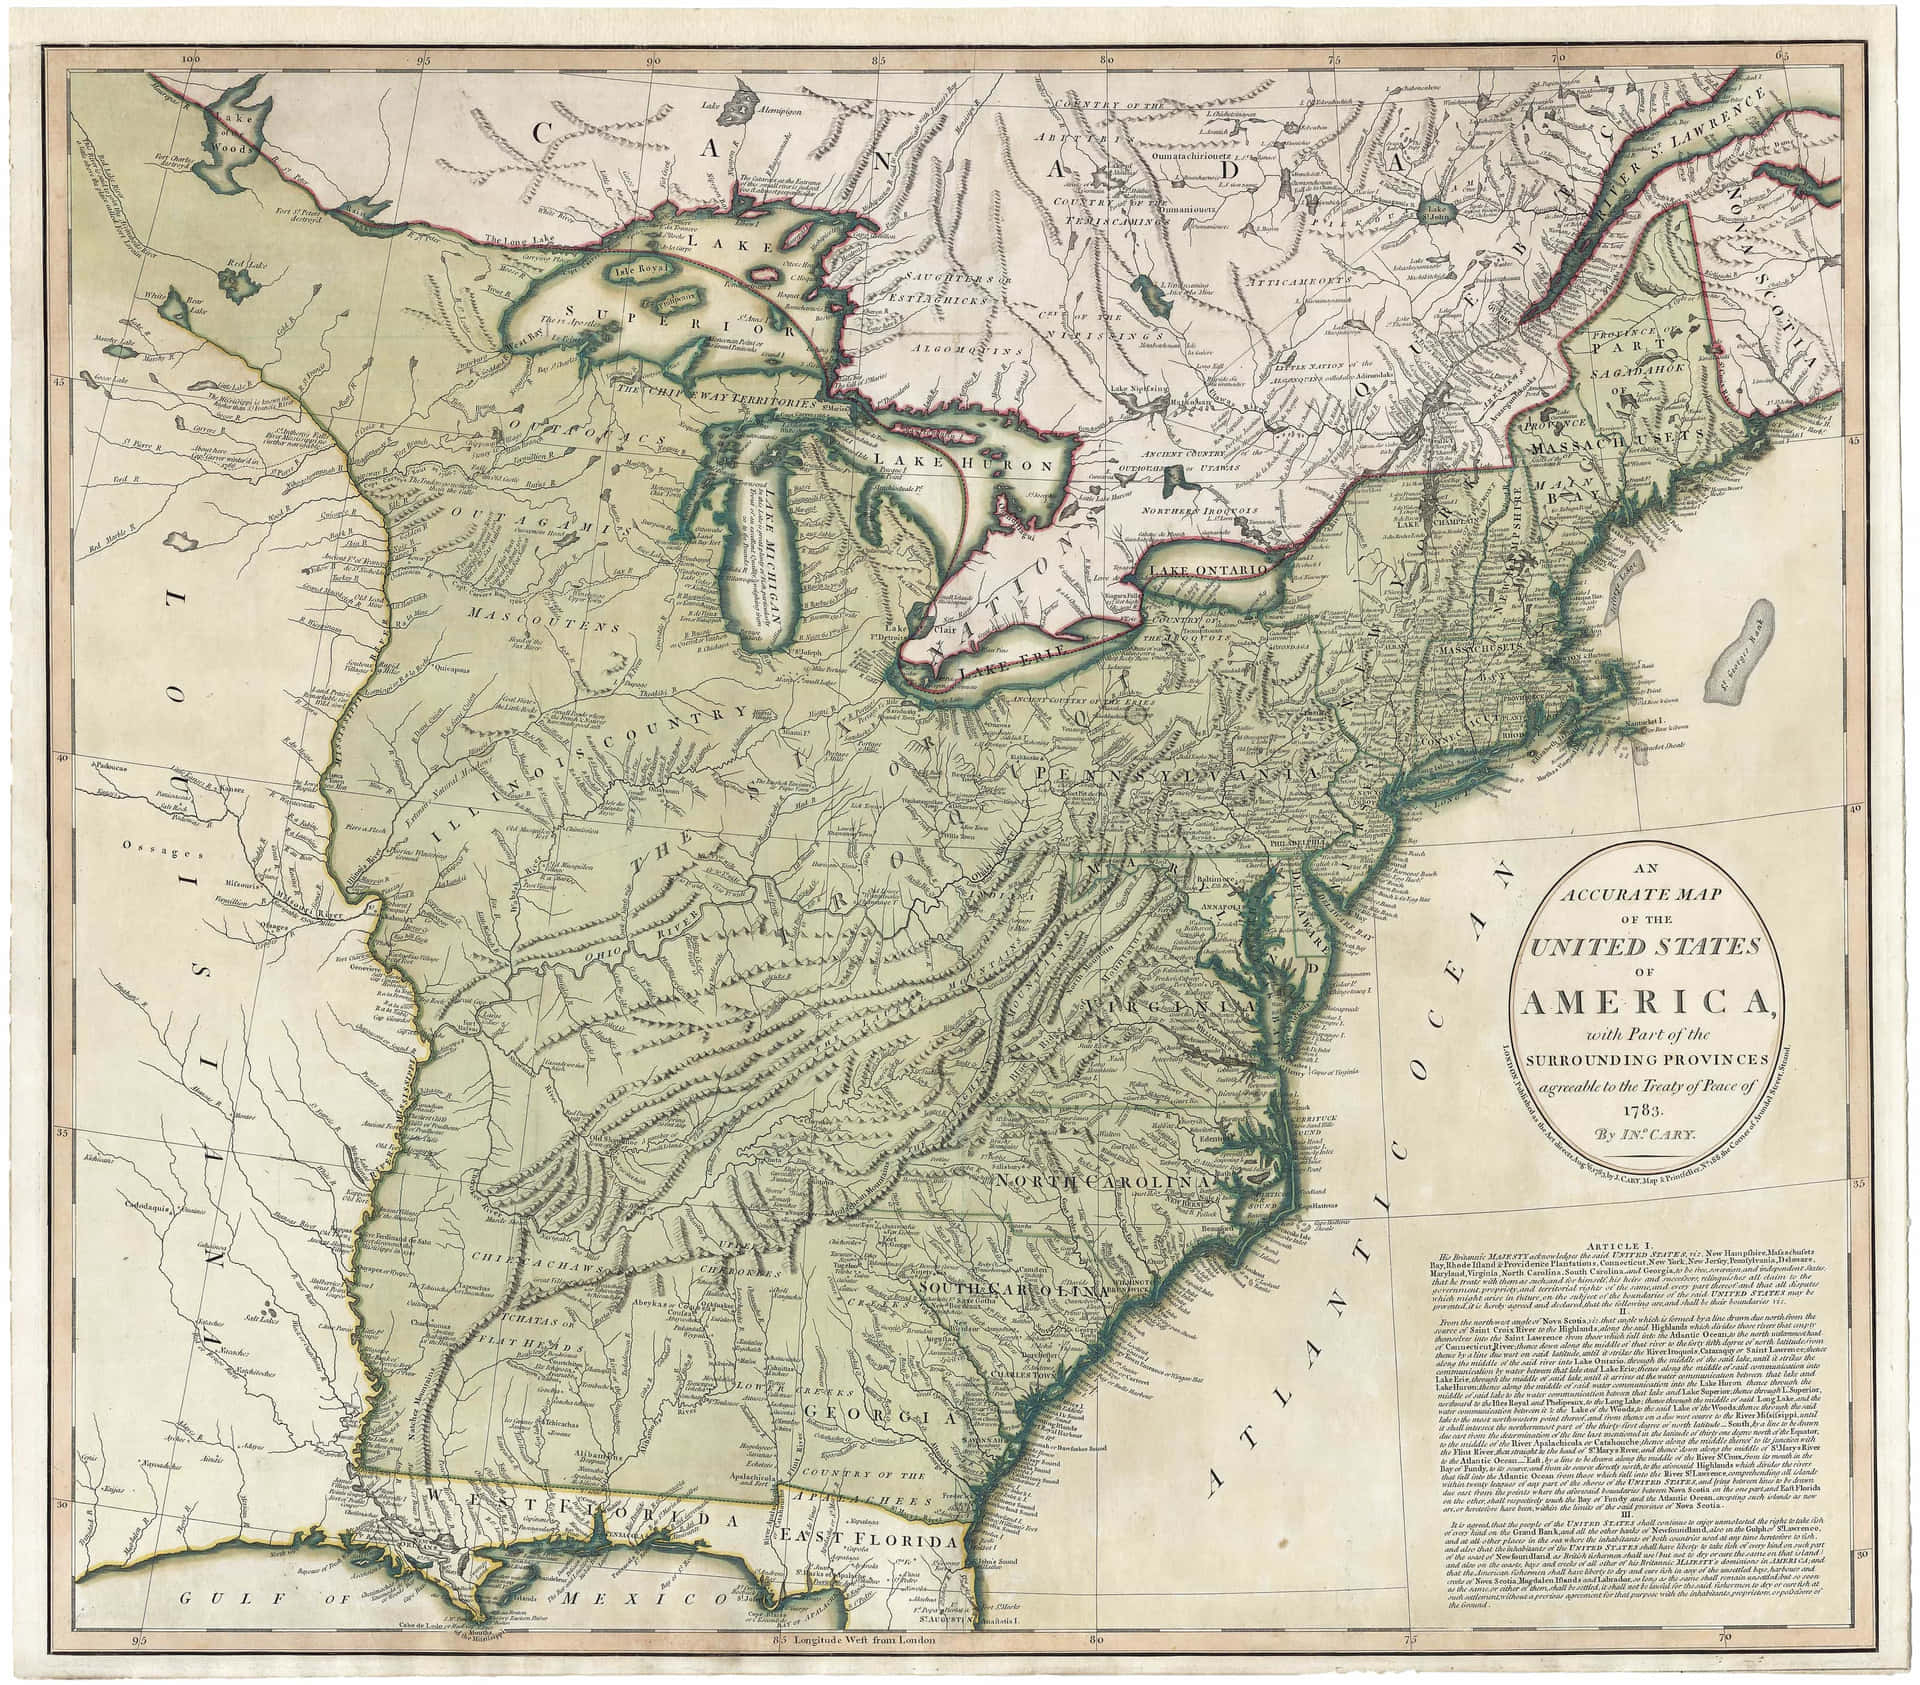 Antique Mapof United States1787 Wallpaper